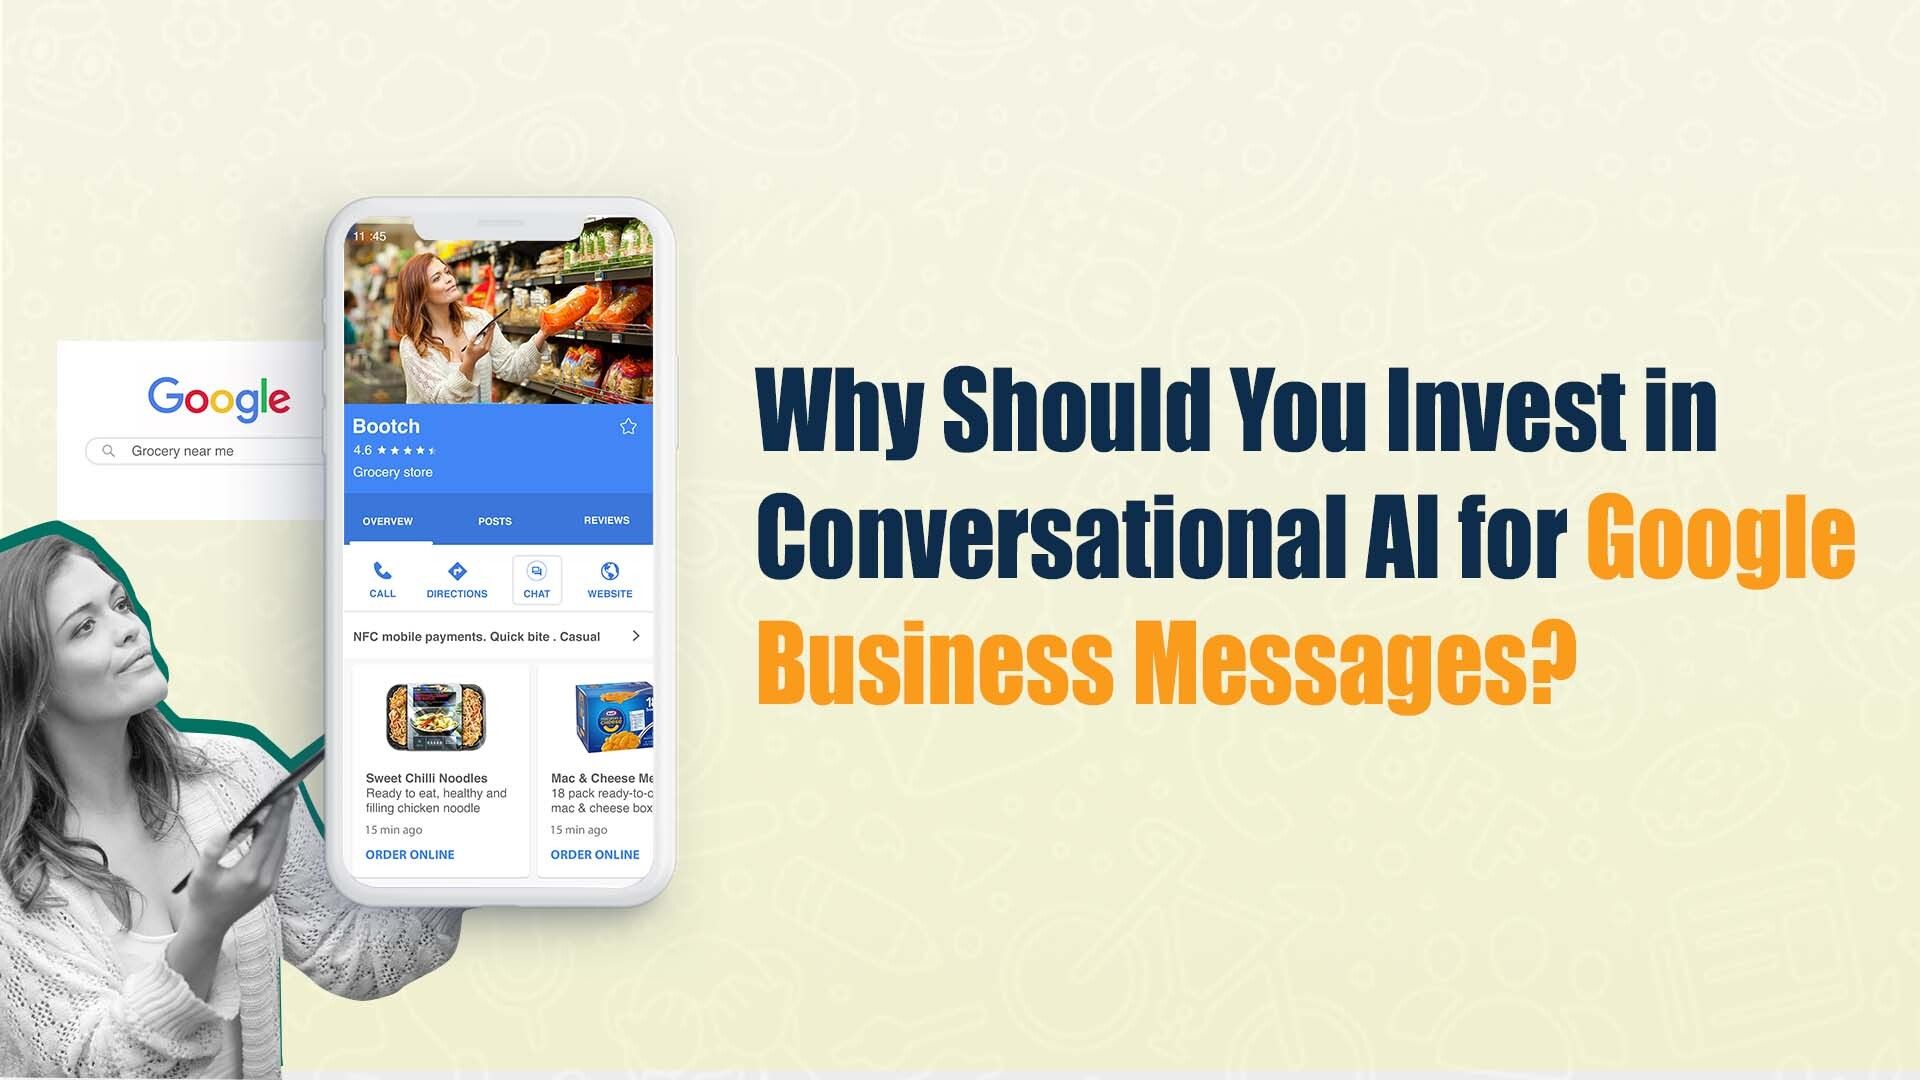 Why Should you Invest in Conversational AI for Google Business Messages?